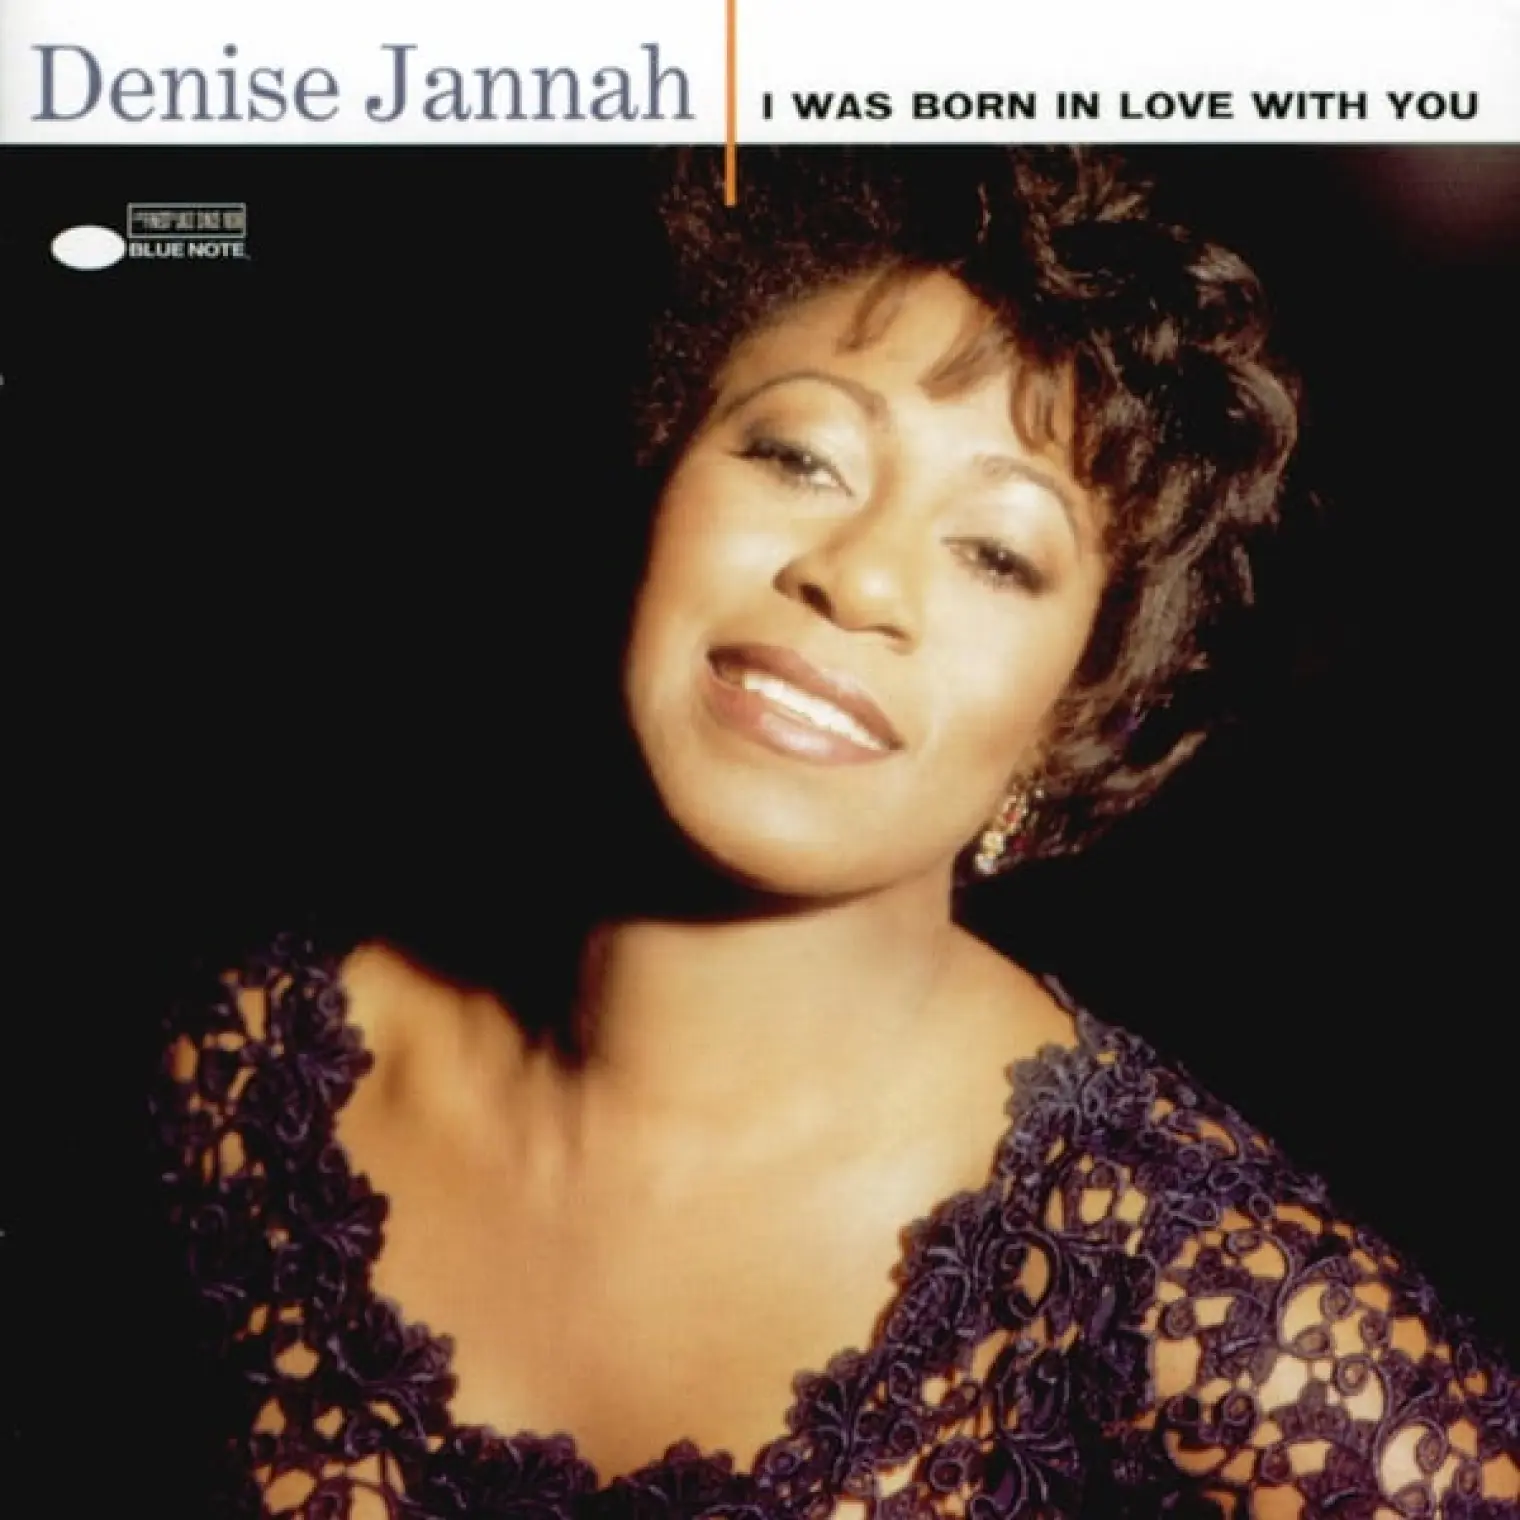 I Was Born In Love With You -  Denise Jannah 